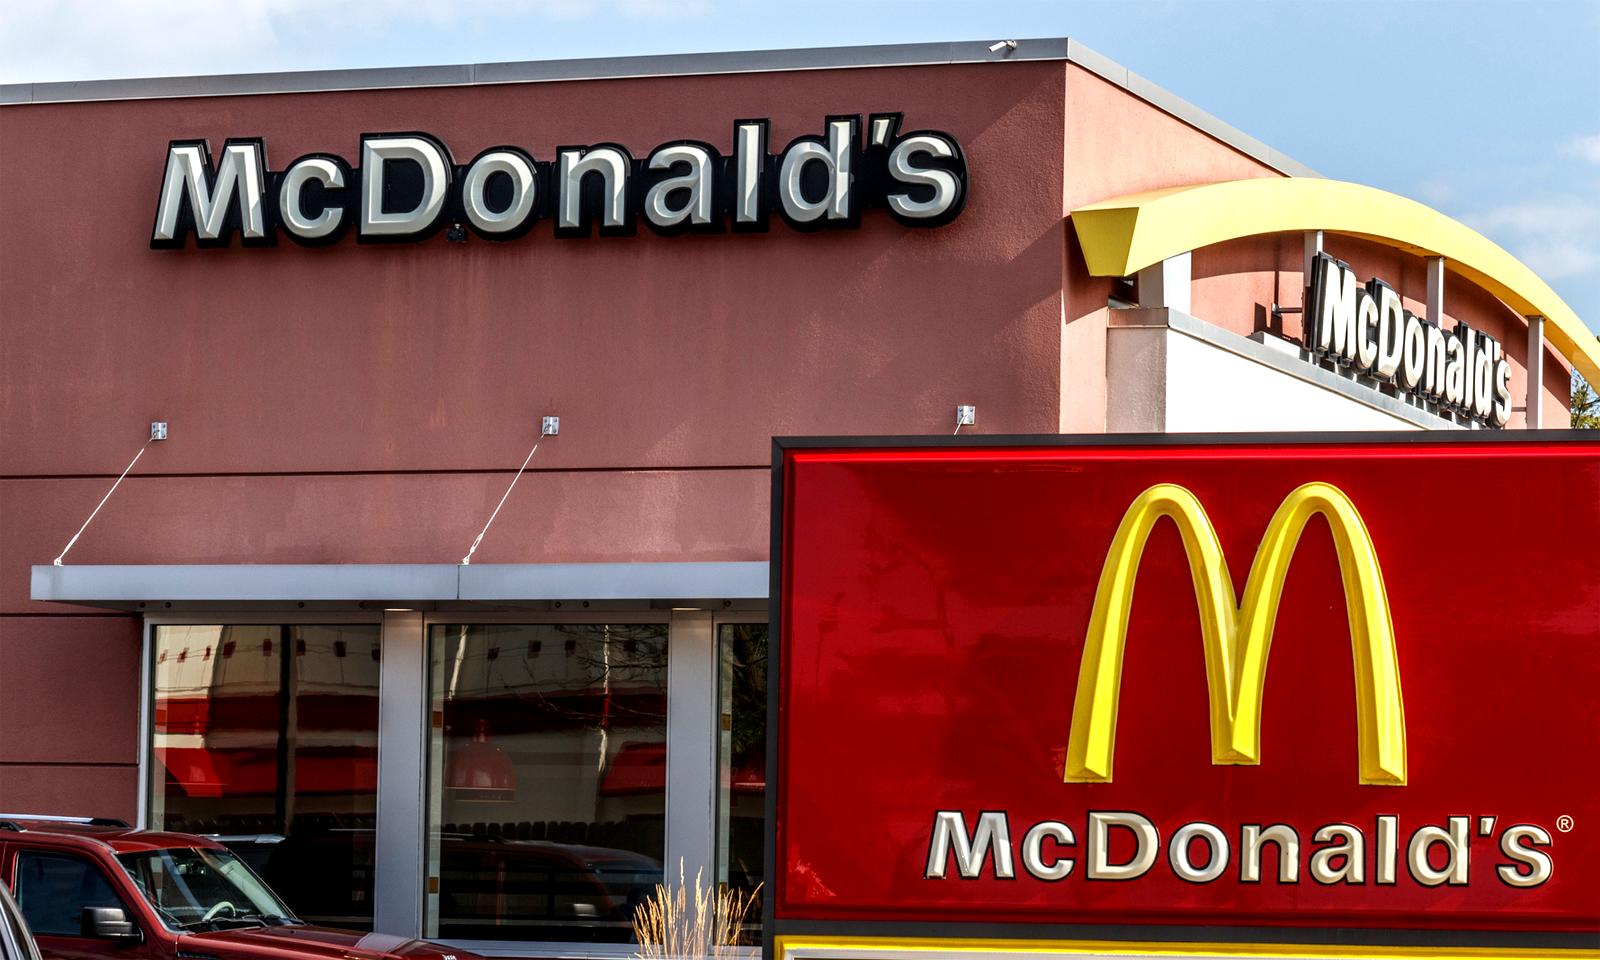 McDonald's Called Out For Not Having $1 Items on Dollar Menu - Men's Journal